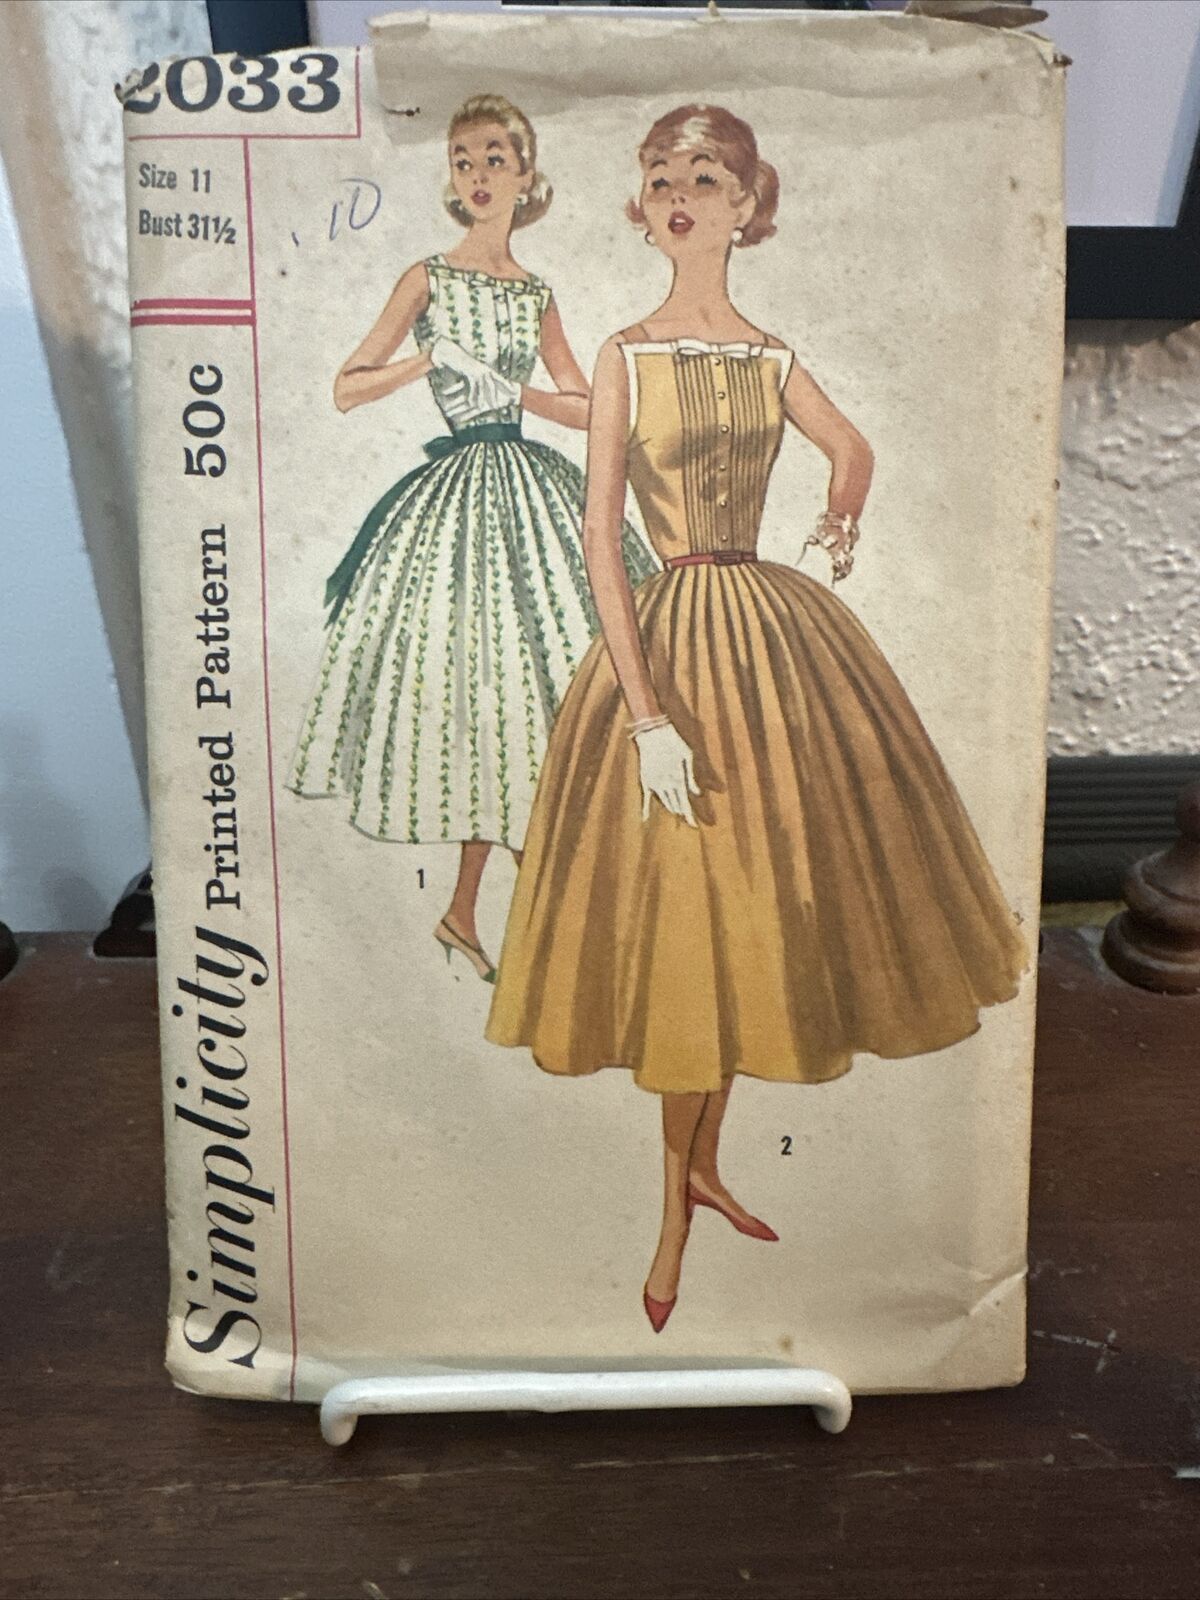 Vintage 1940s Simplicity Sewing Pattern 2033 Misses Dress Size 11 31 1/2 Bust